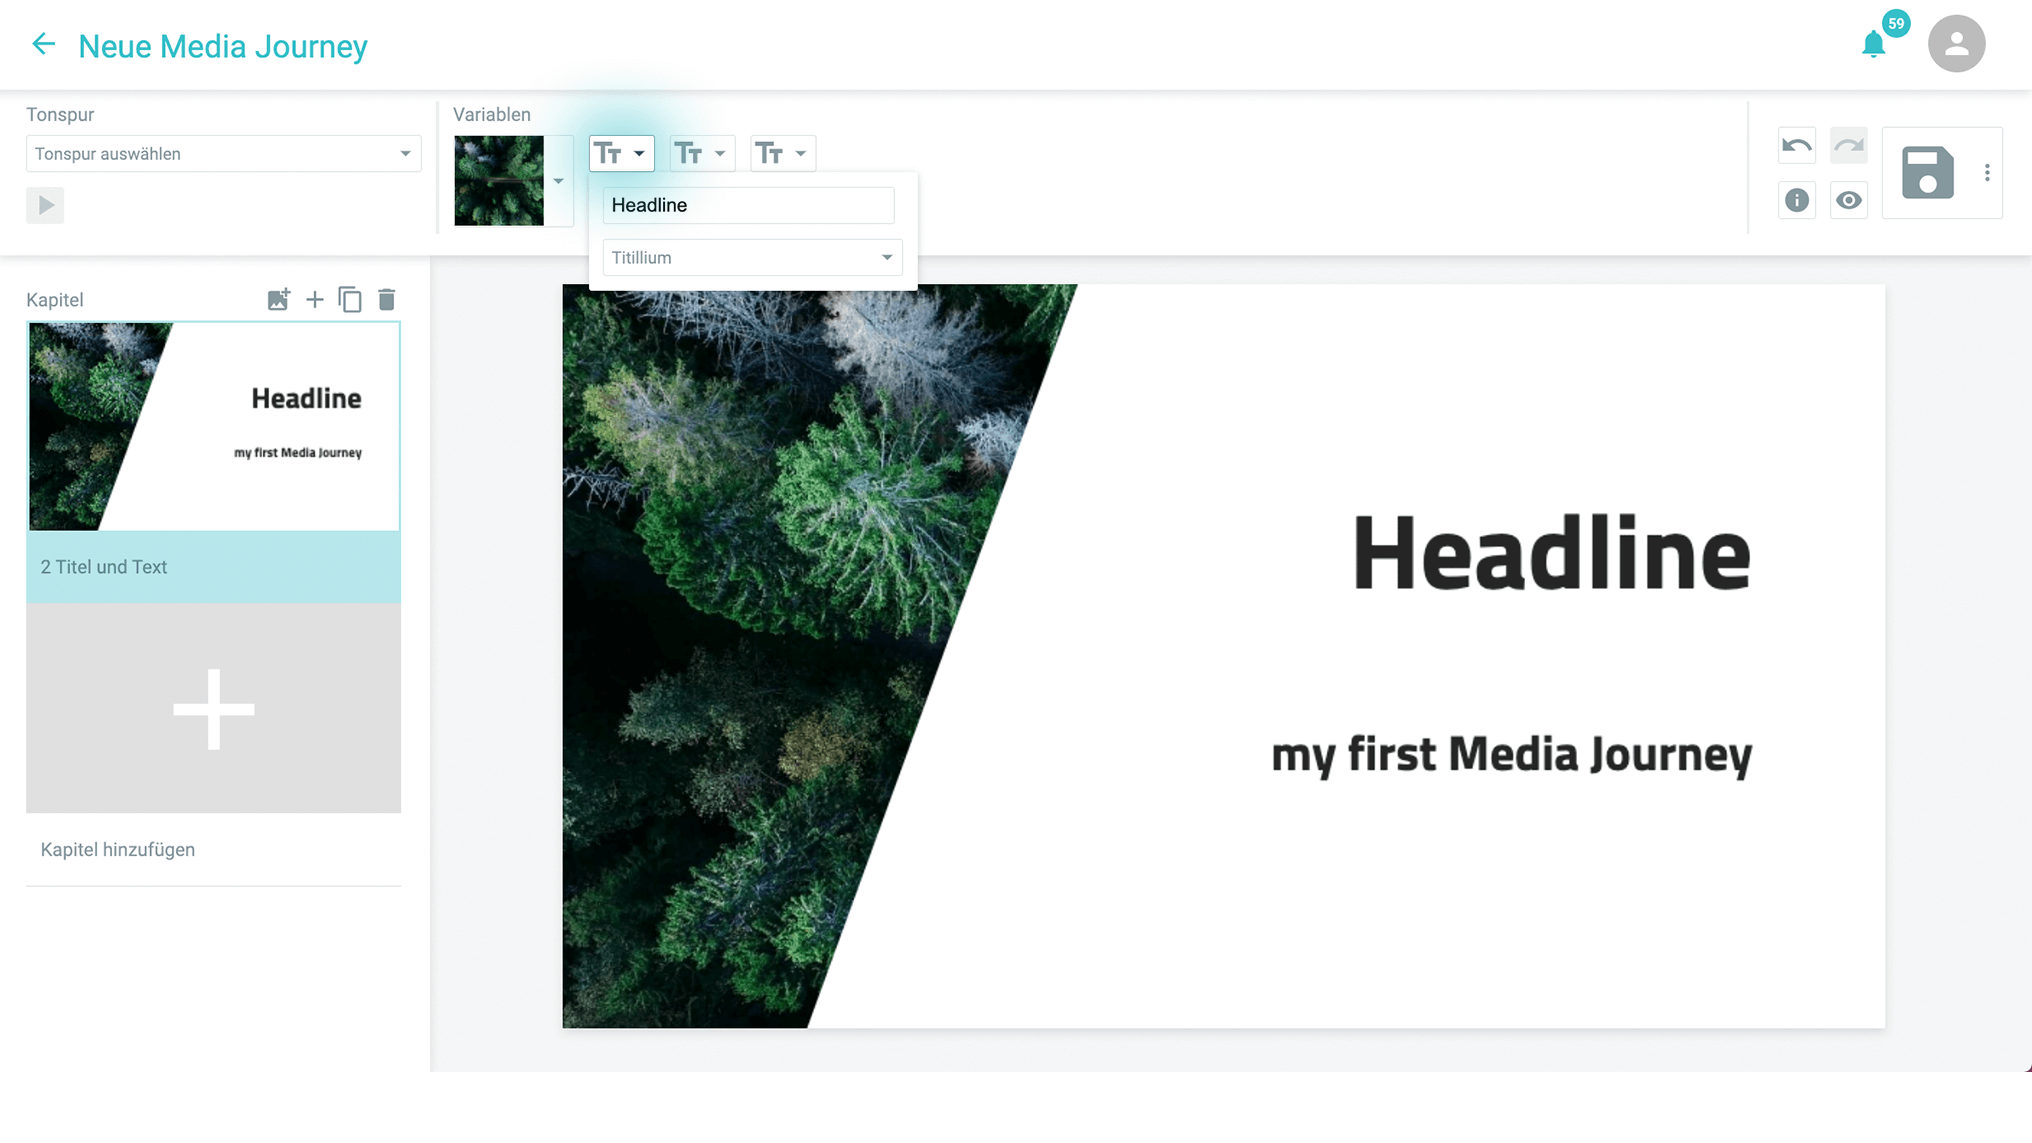 Adjust fonts and colors in your Media Journey